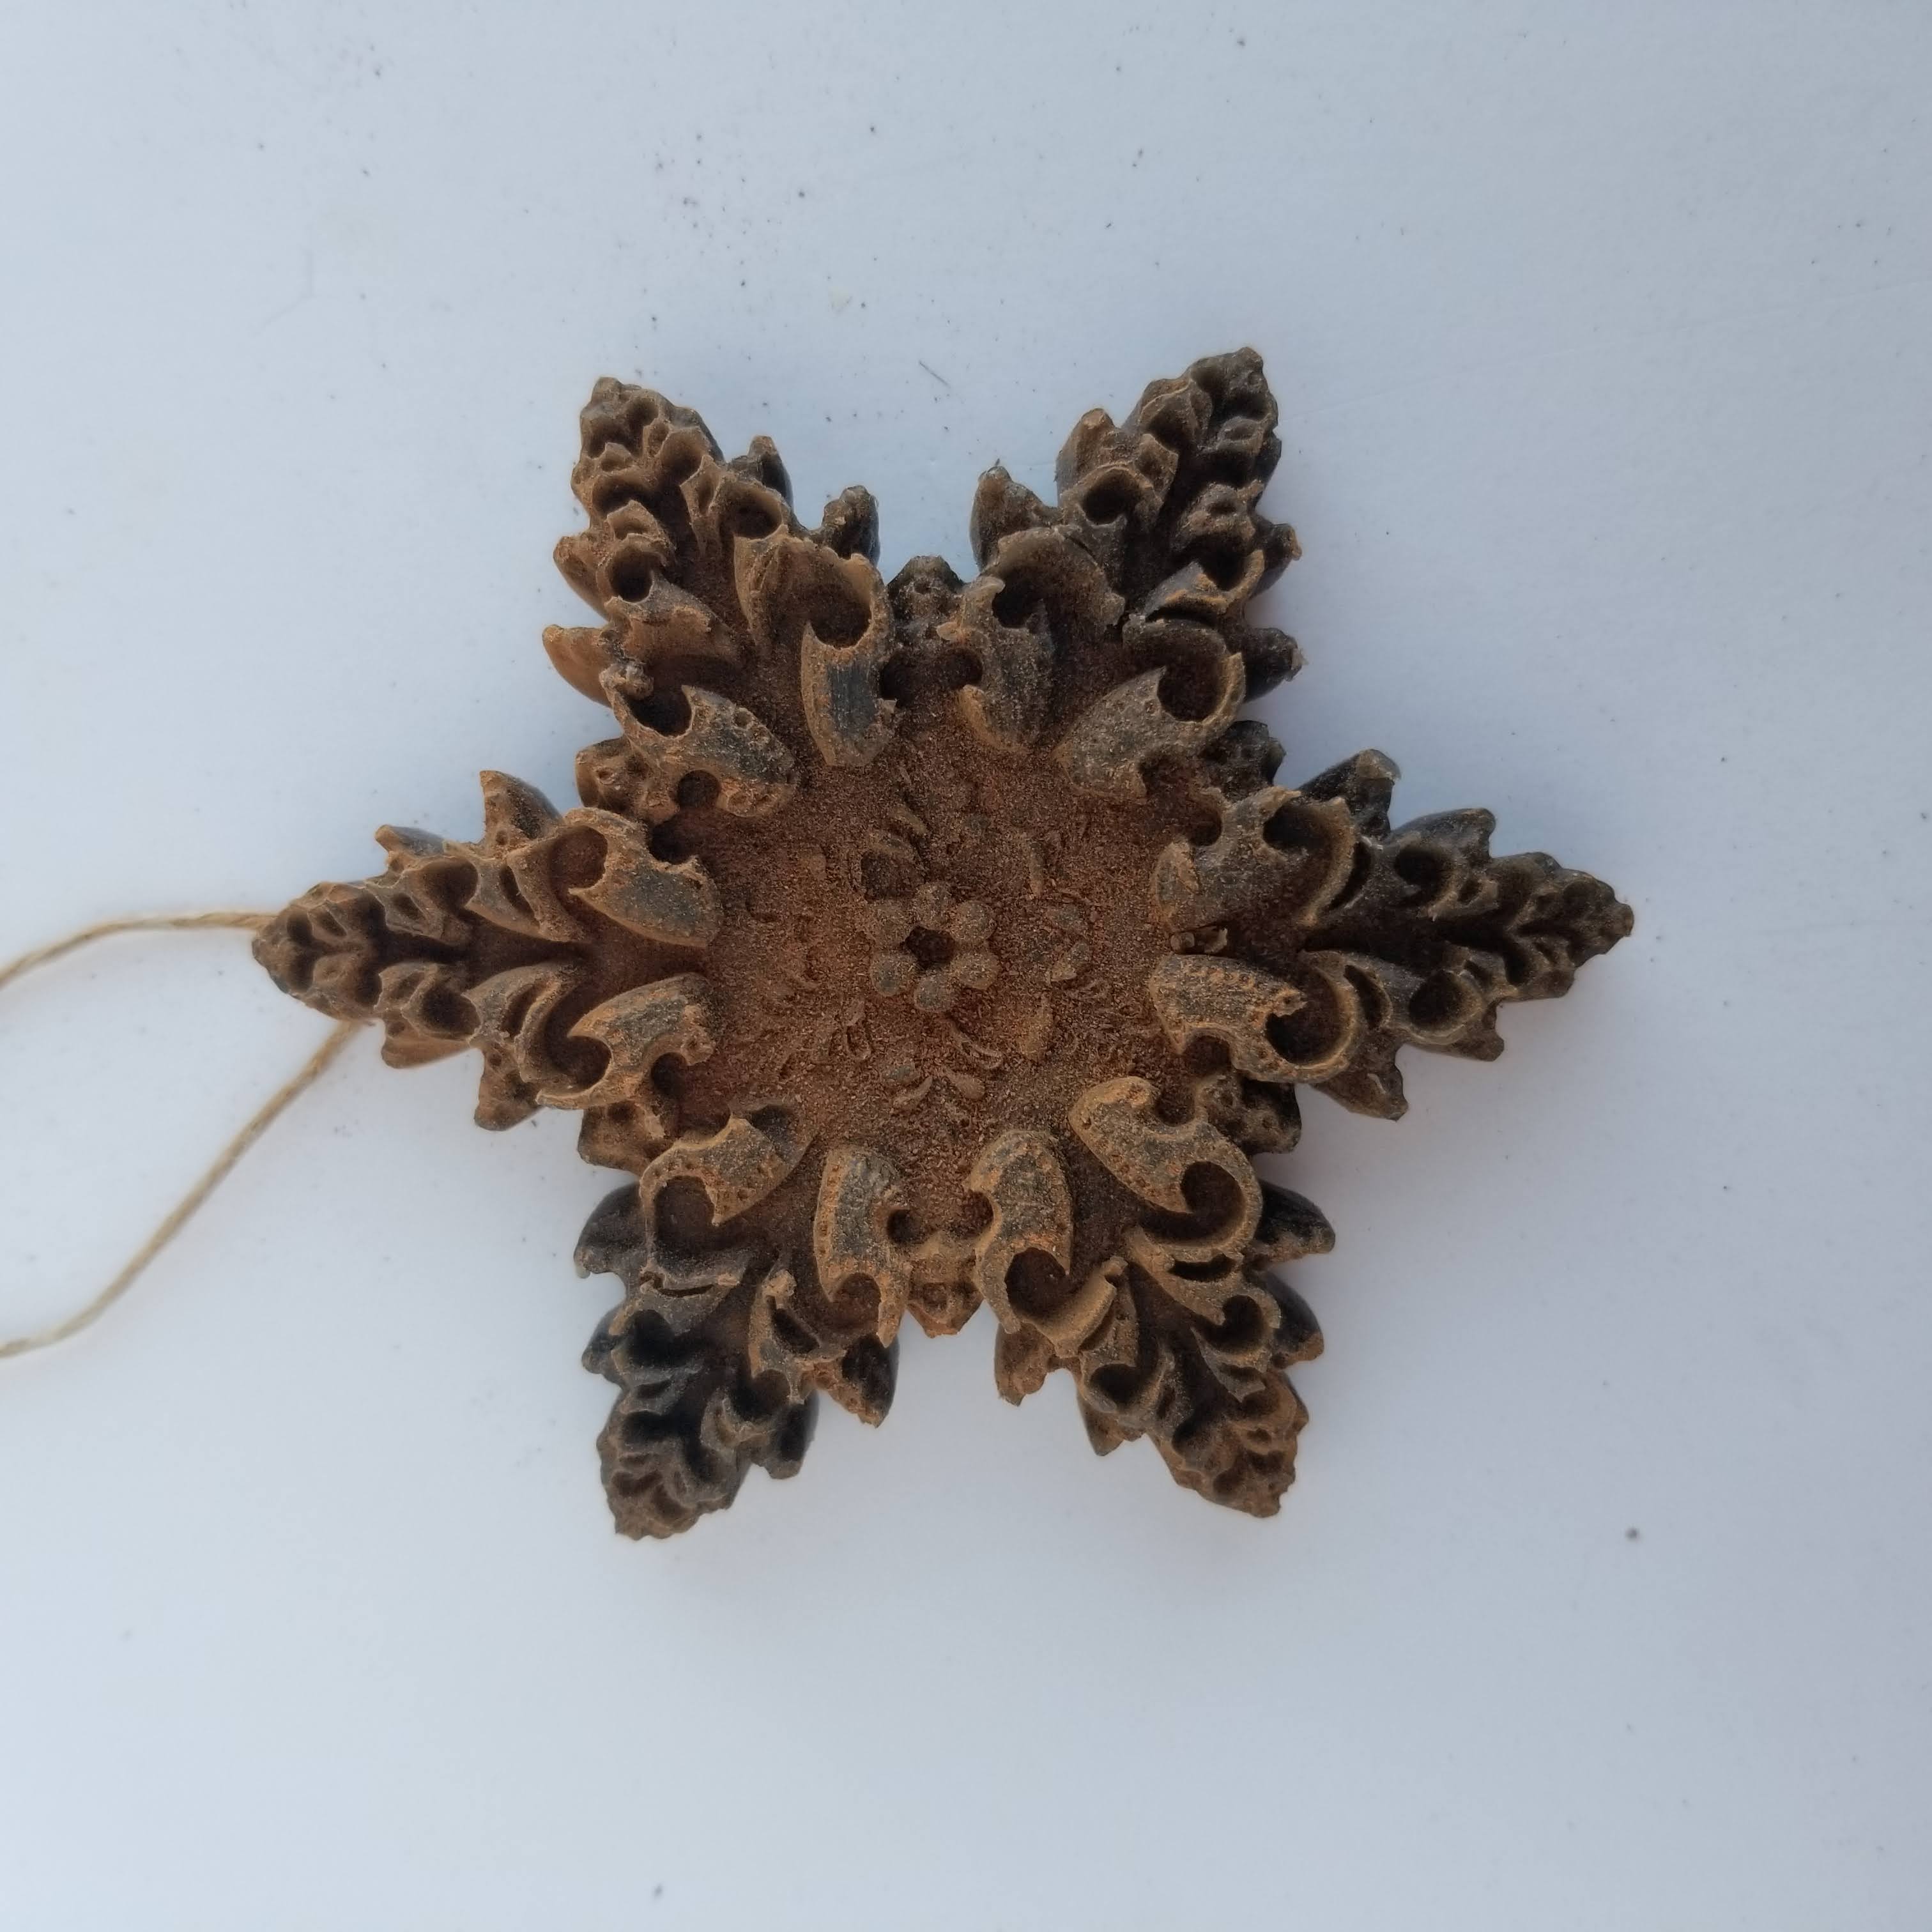 Frozen Snowflake Beeswax Ornament - Antiqued Cinnamon